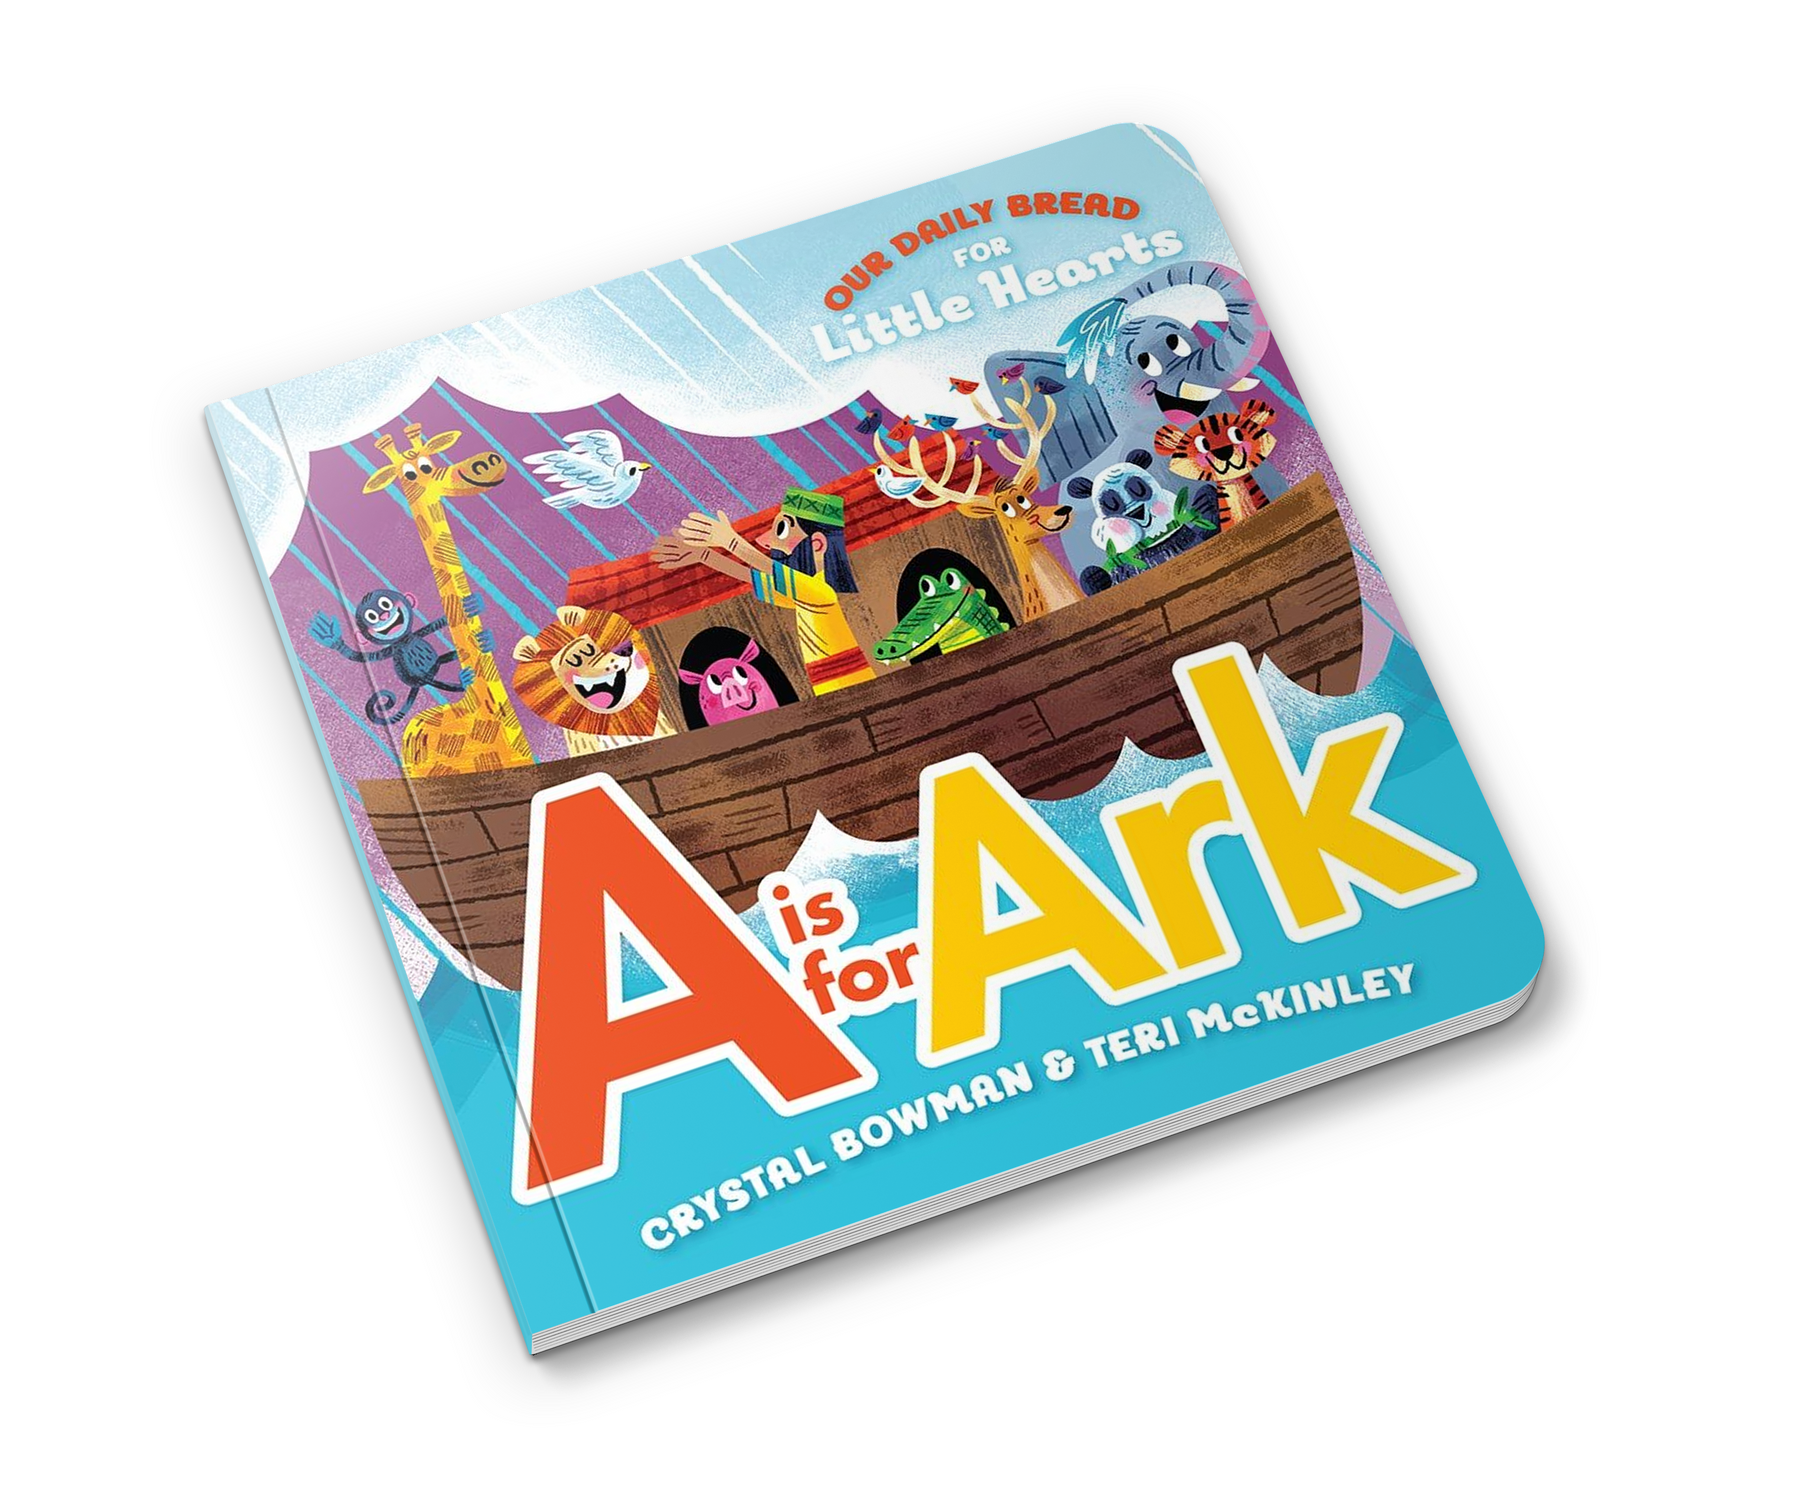 A is for Ark (Board Book) by Discovery House